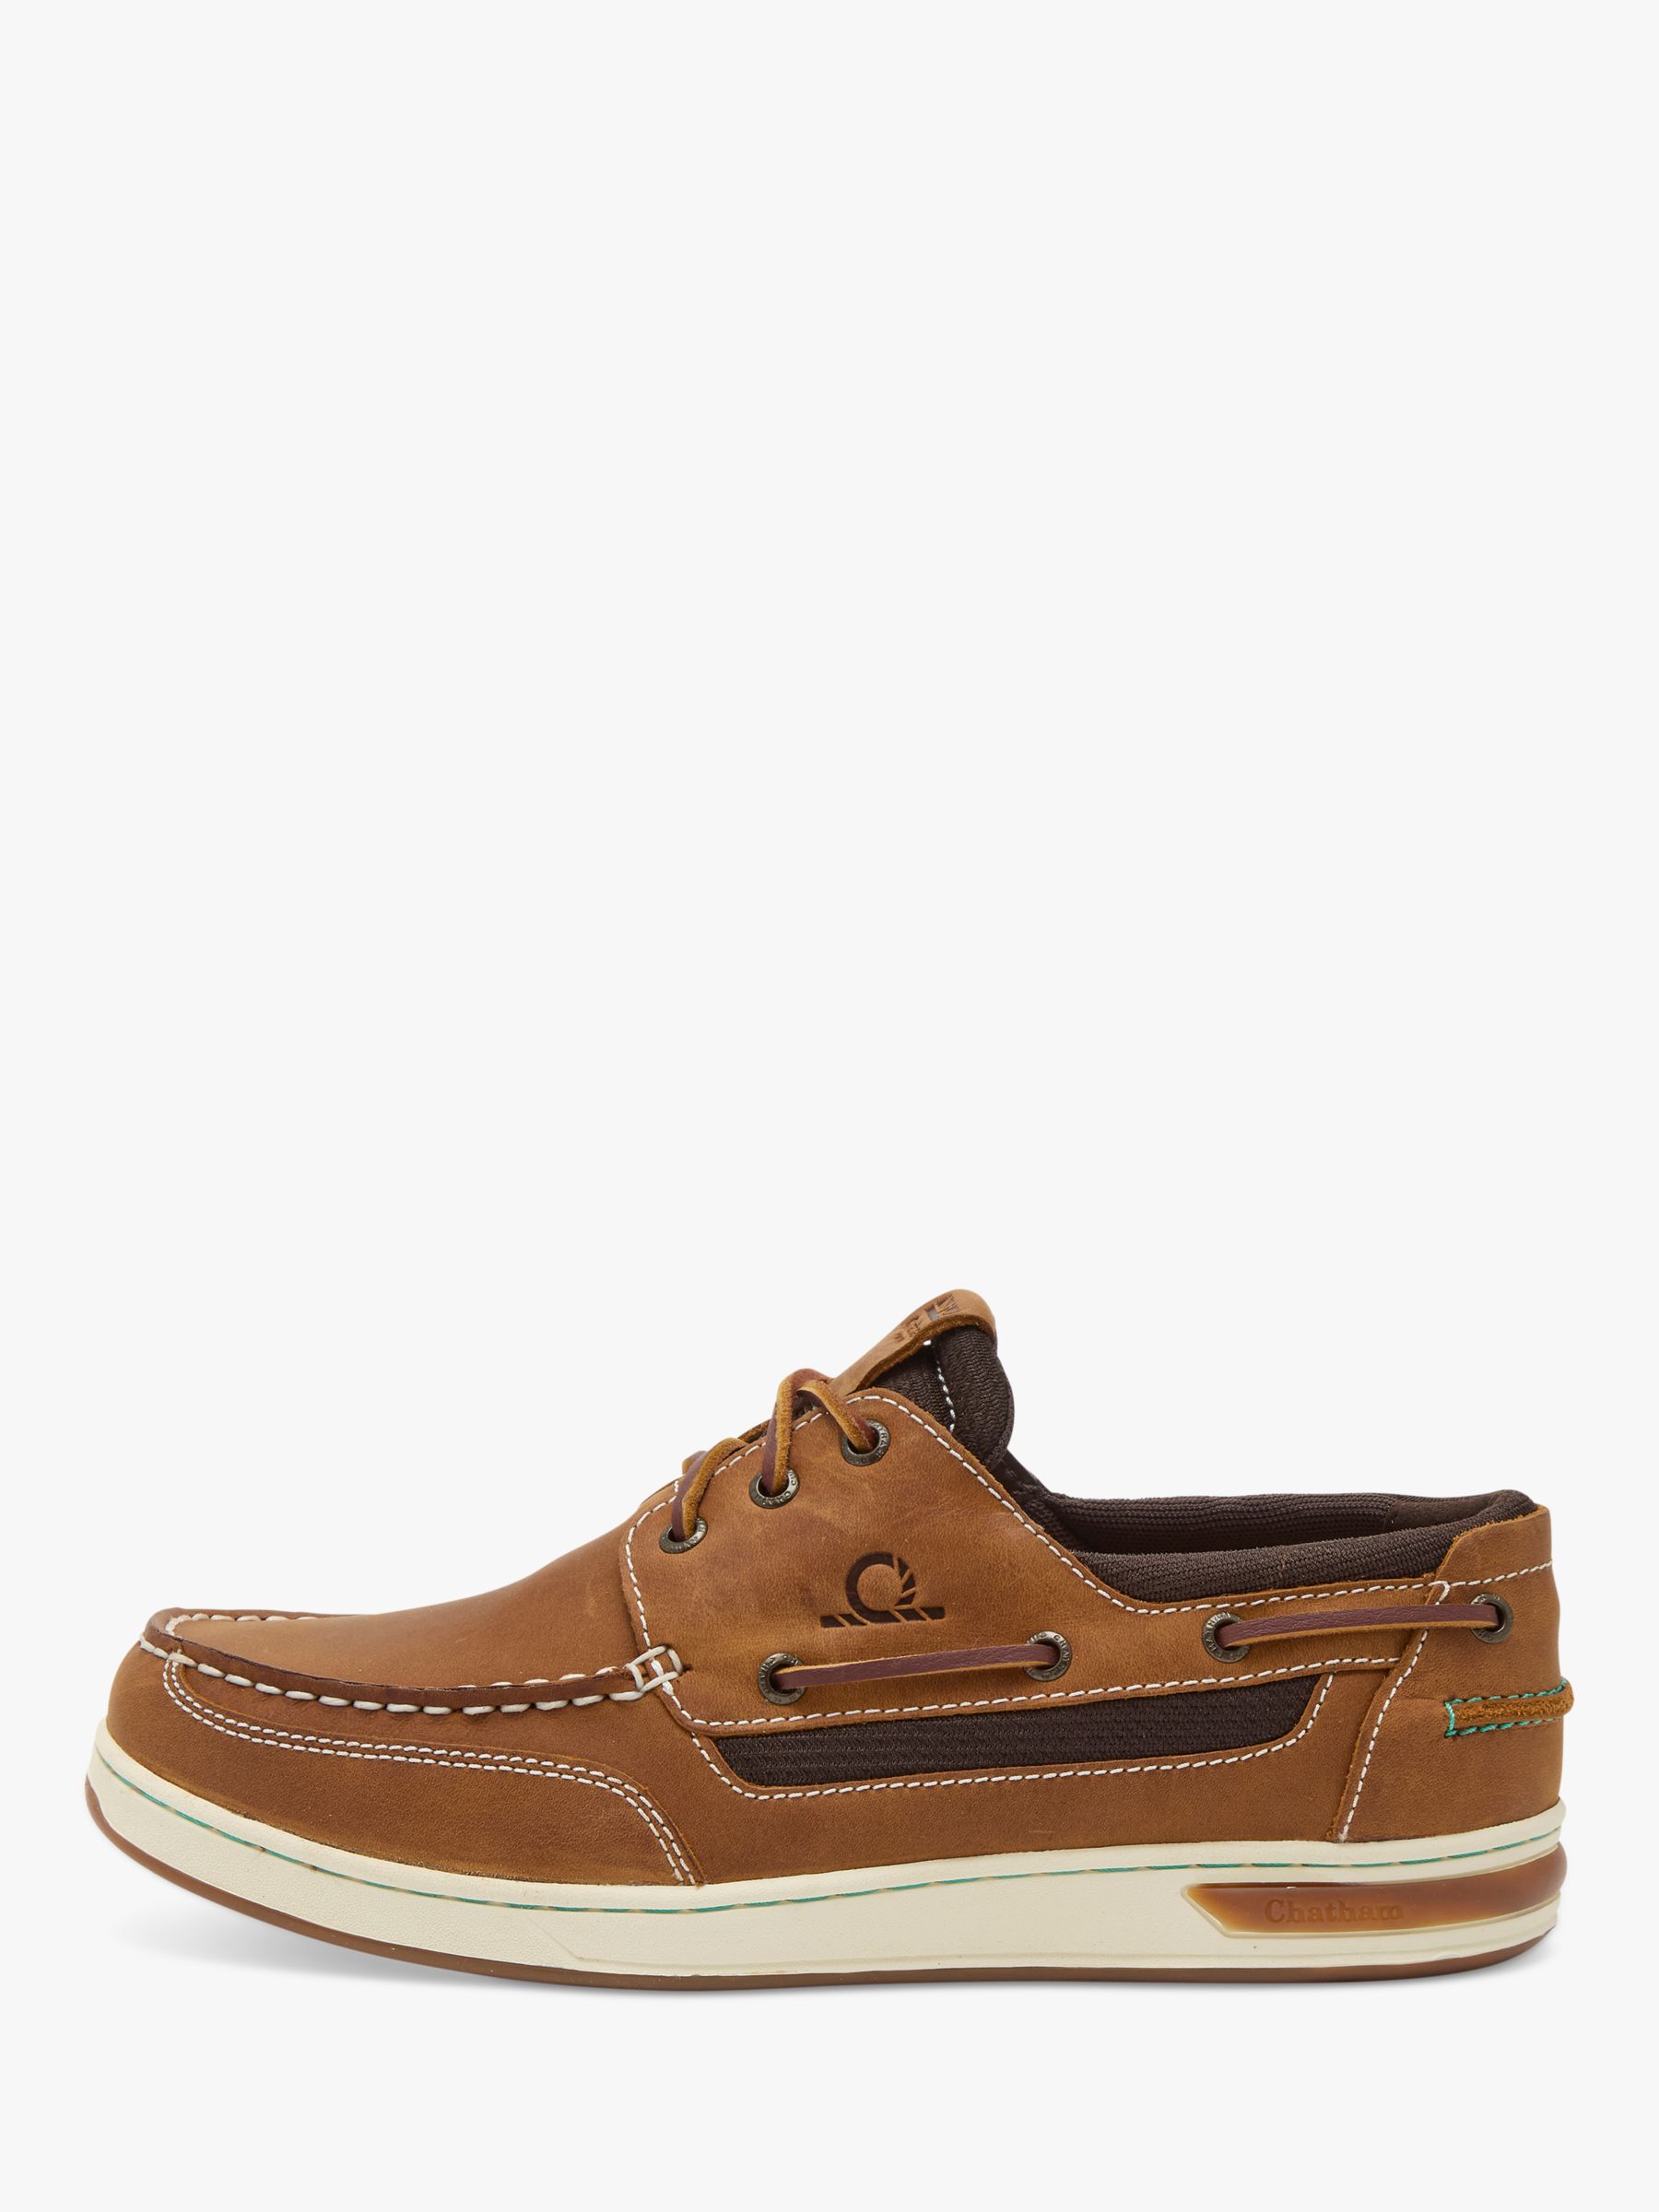 Chatham Buton G2 Leather Deck Shoes, Walnut, 7